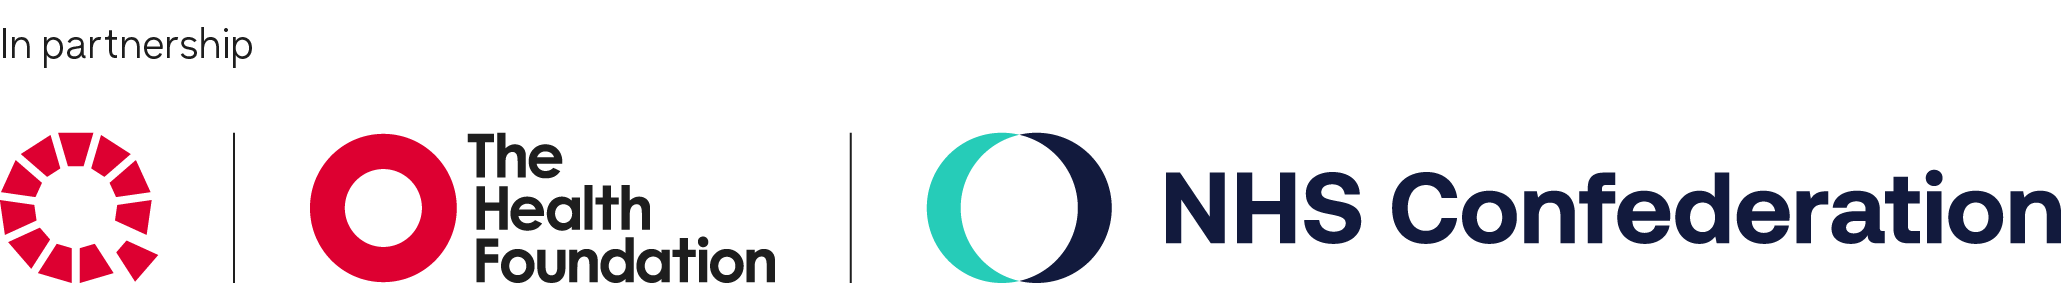 A logo lock up showing the Q, Health Foundation and NHS Confederation logos